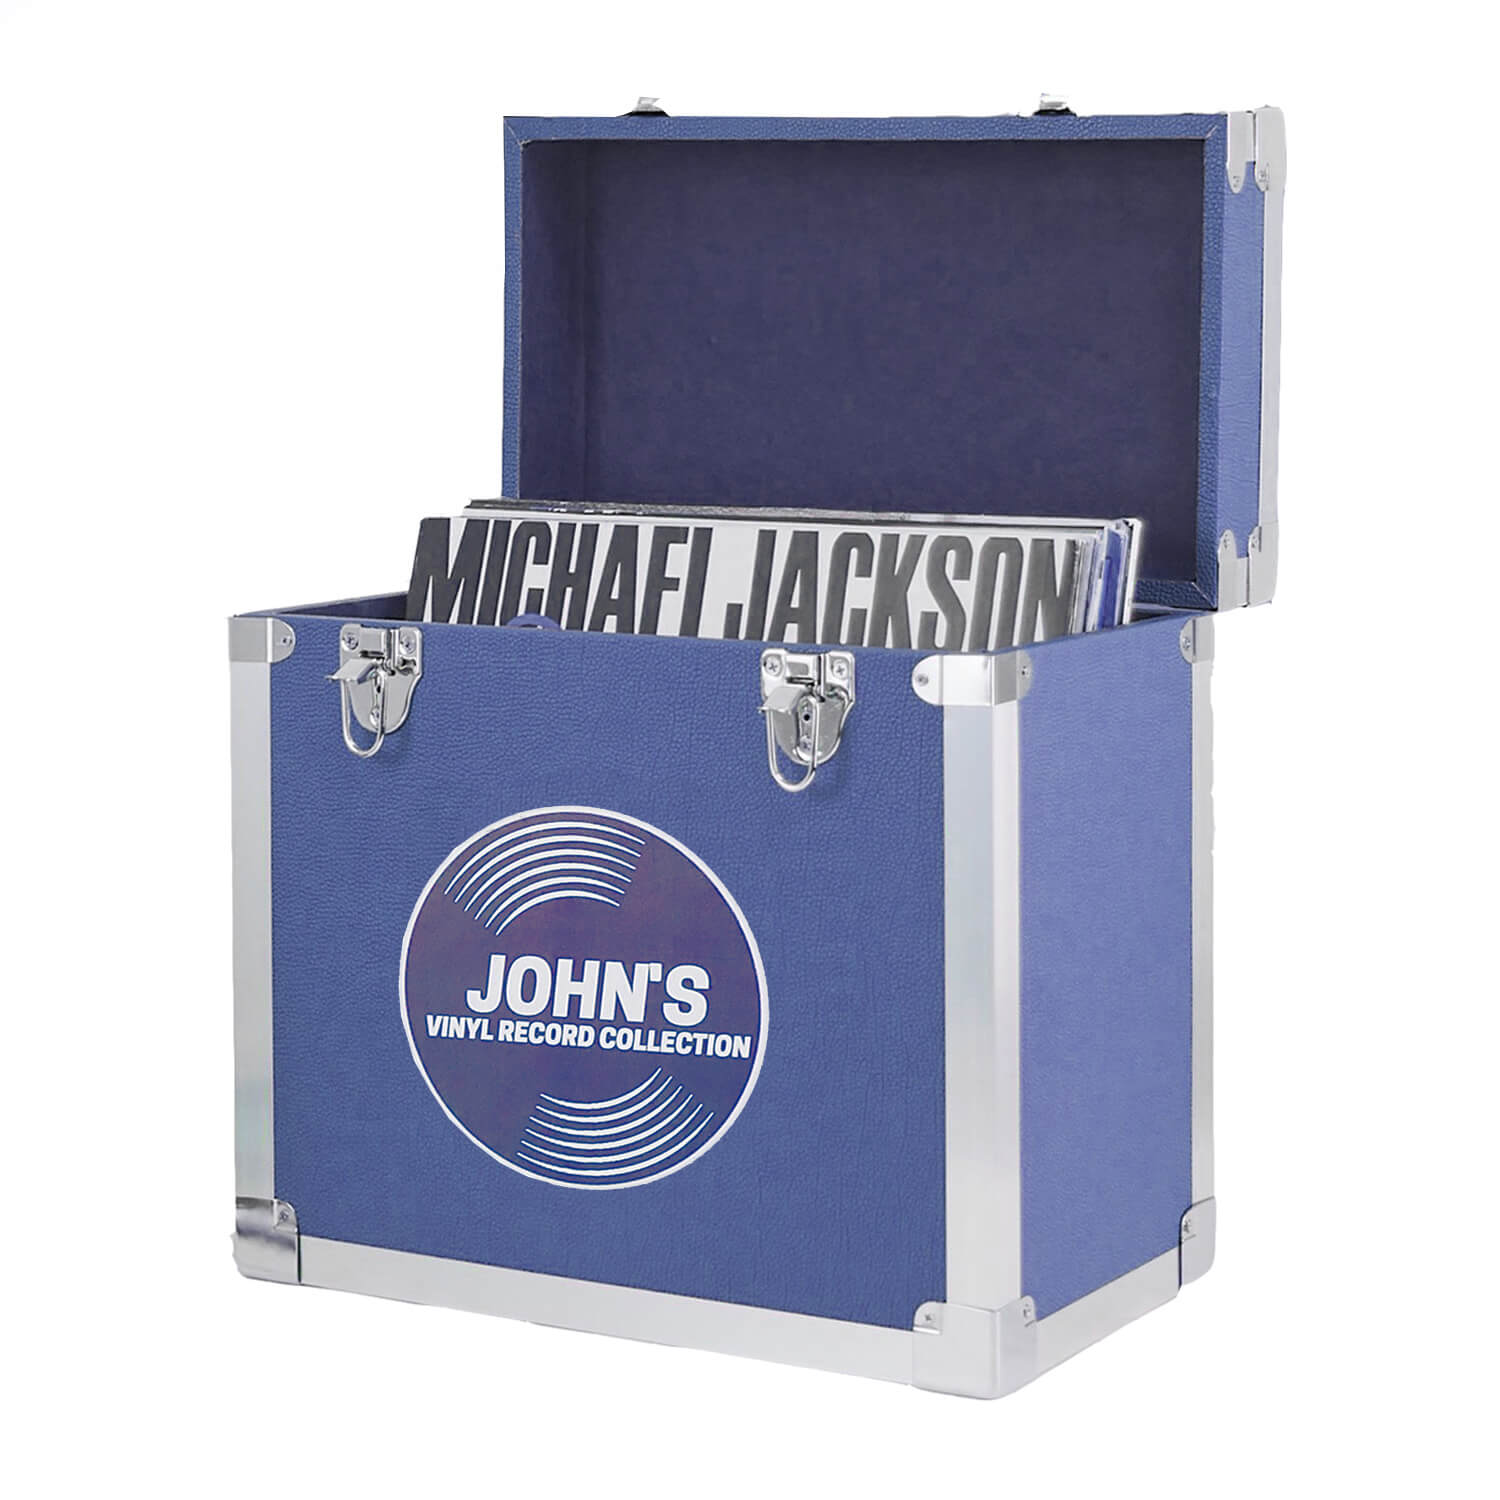 Personalised Music Record Vinyl Storage Box - 12 inch - Navy Blue Vinyl - Stores up to 50 records